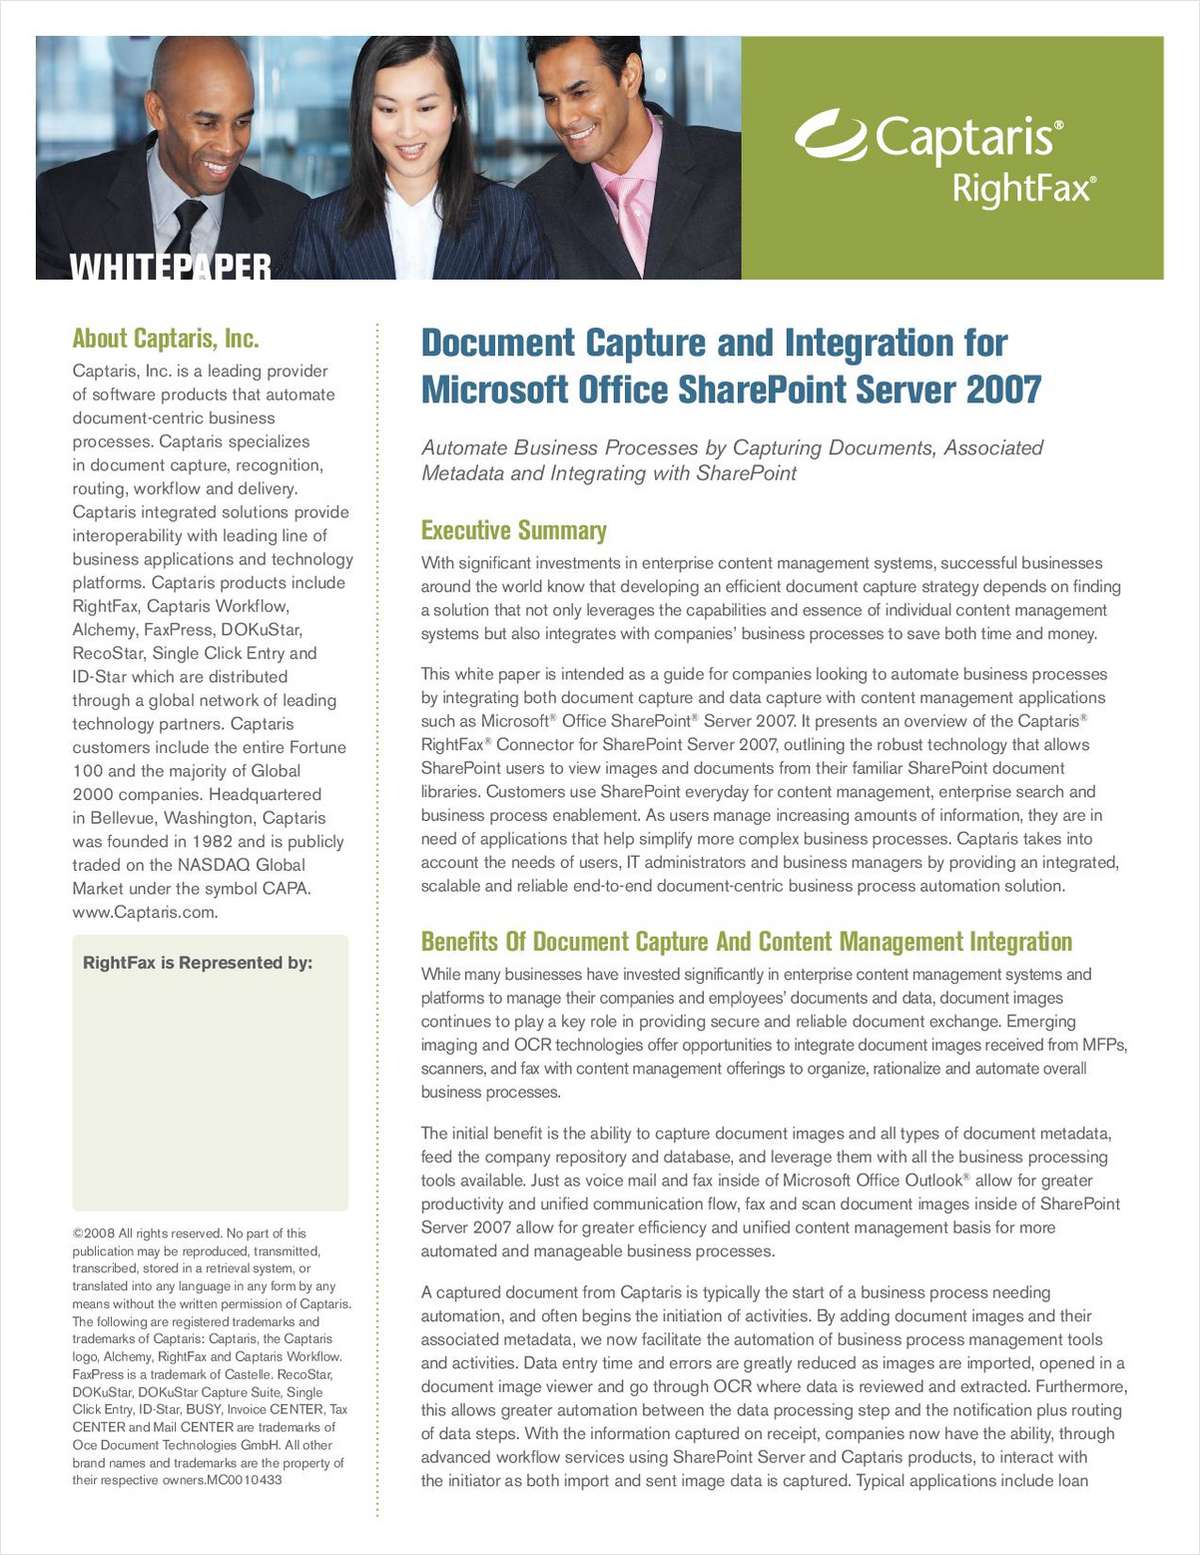 Document Capture and Integration for Microsoft Office SharePoint Server 2007